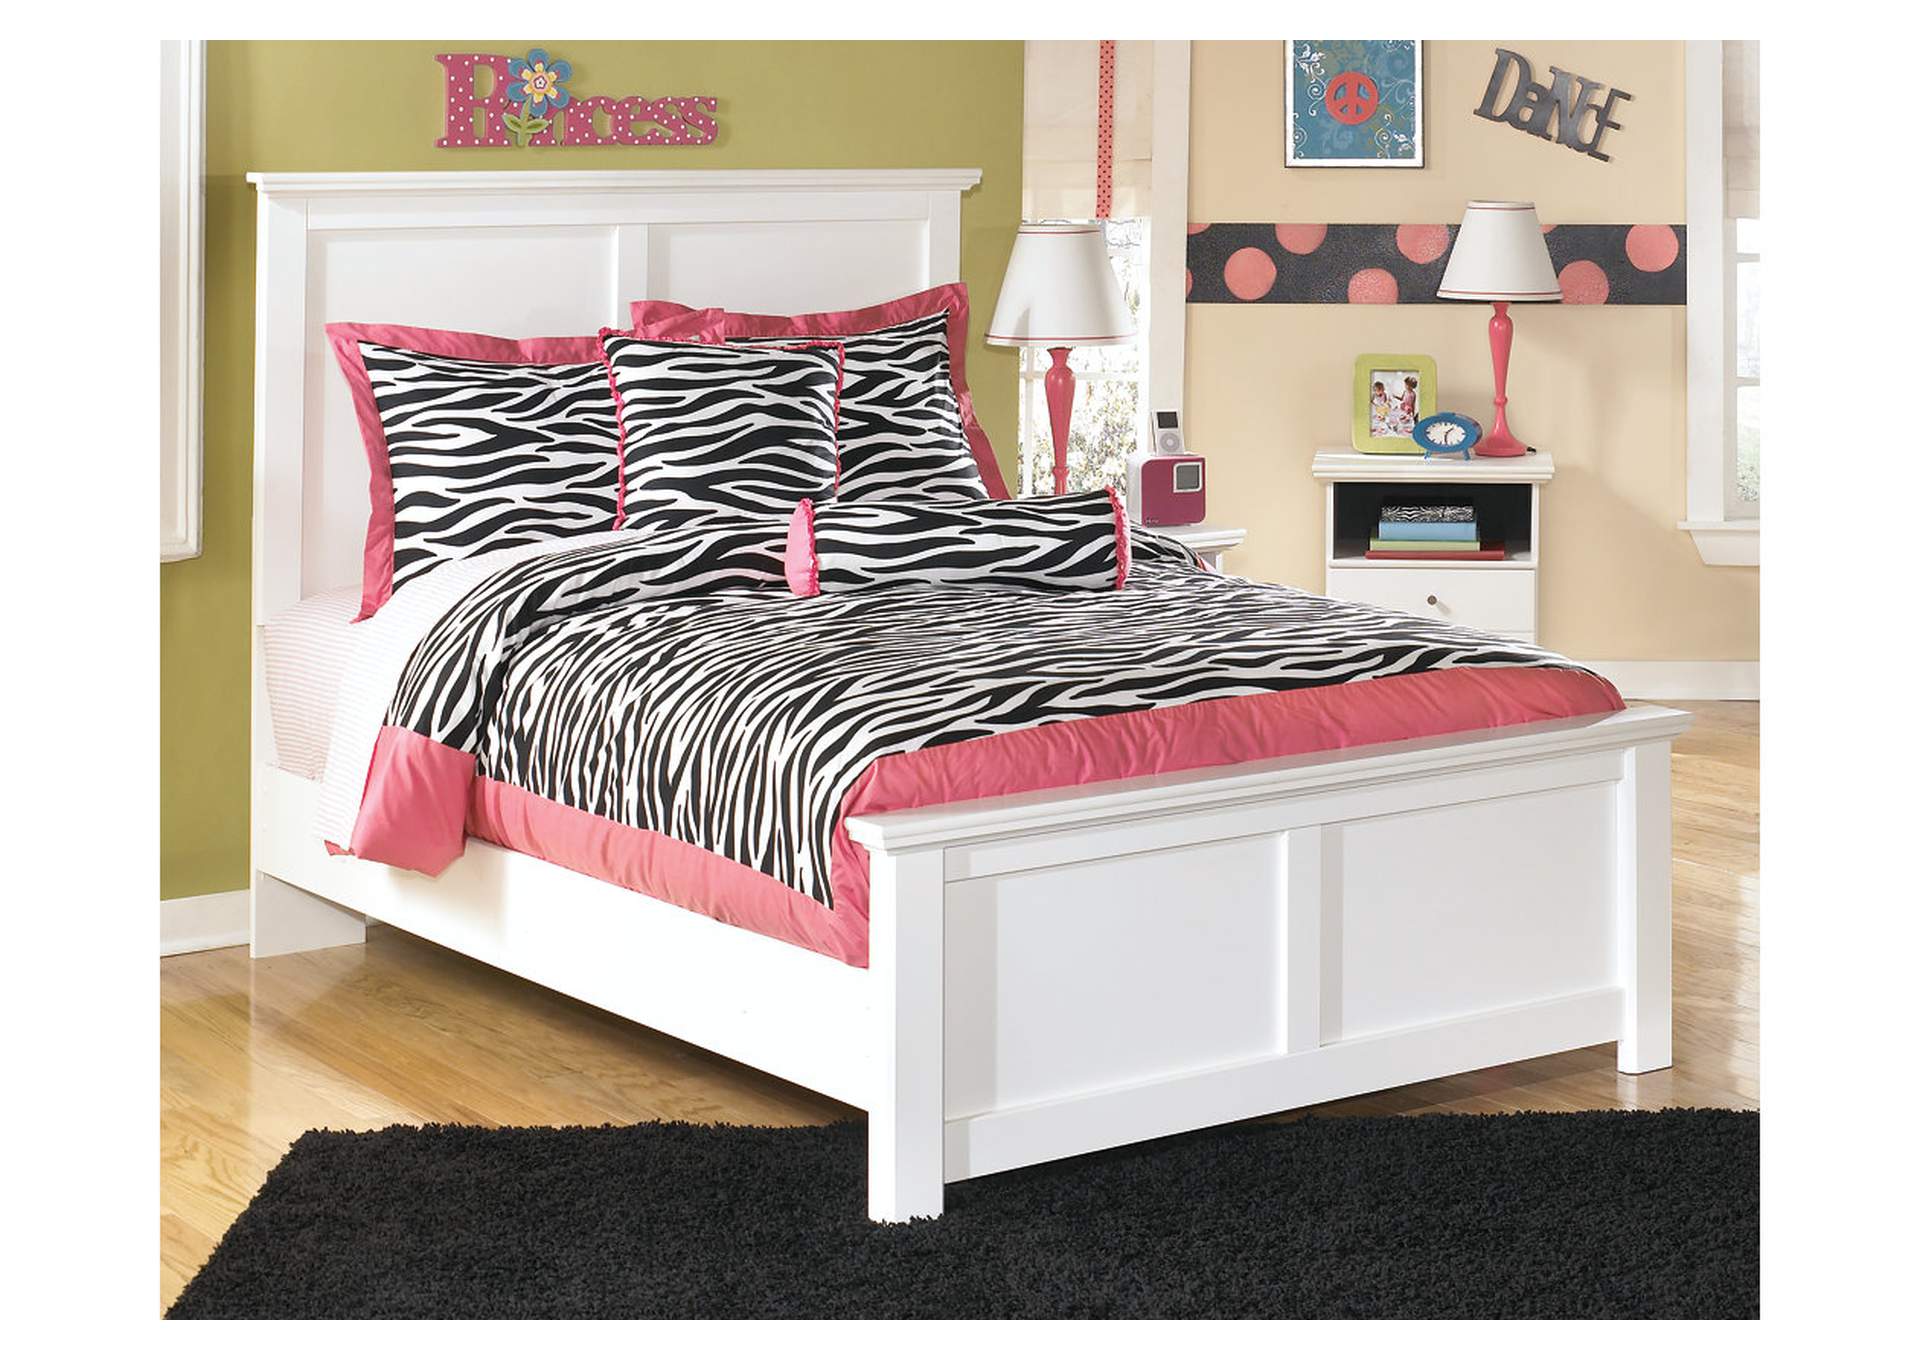 Bostwick Shoals Full Panel Bed,Signature Design By Ashley